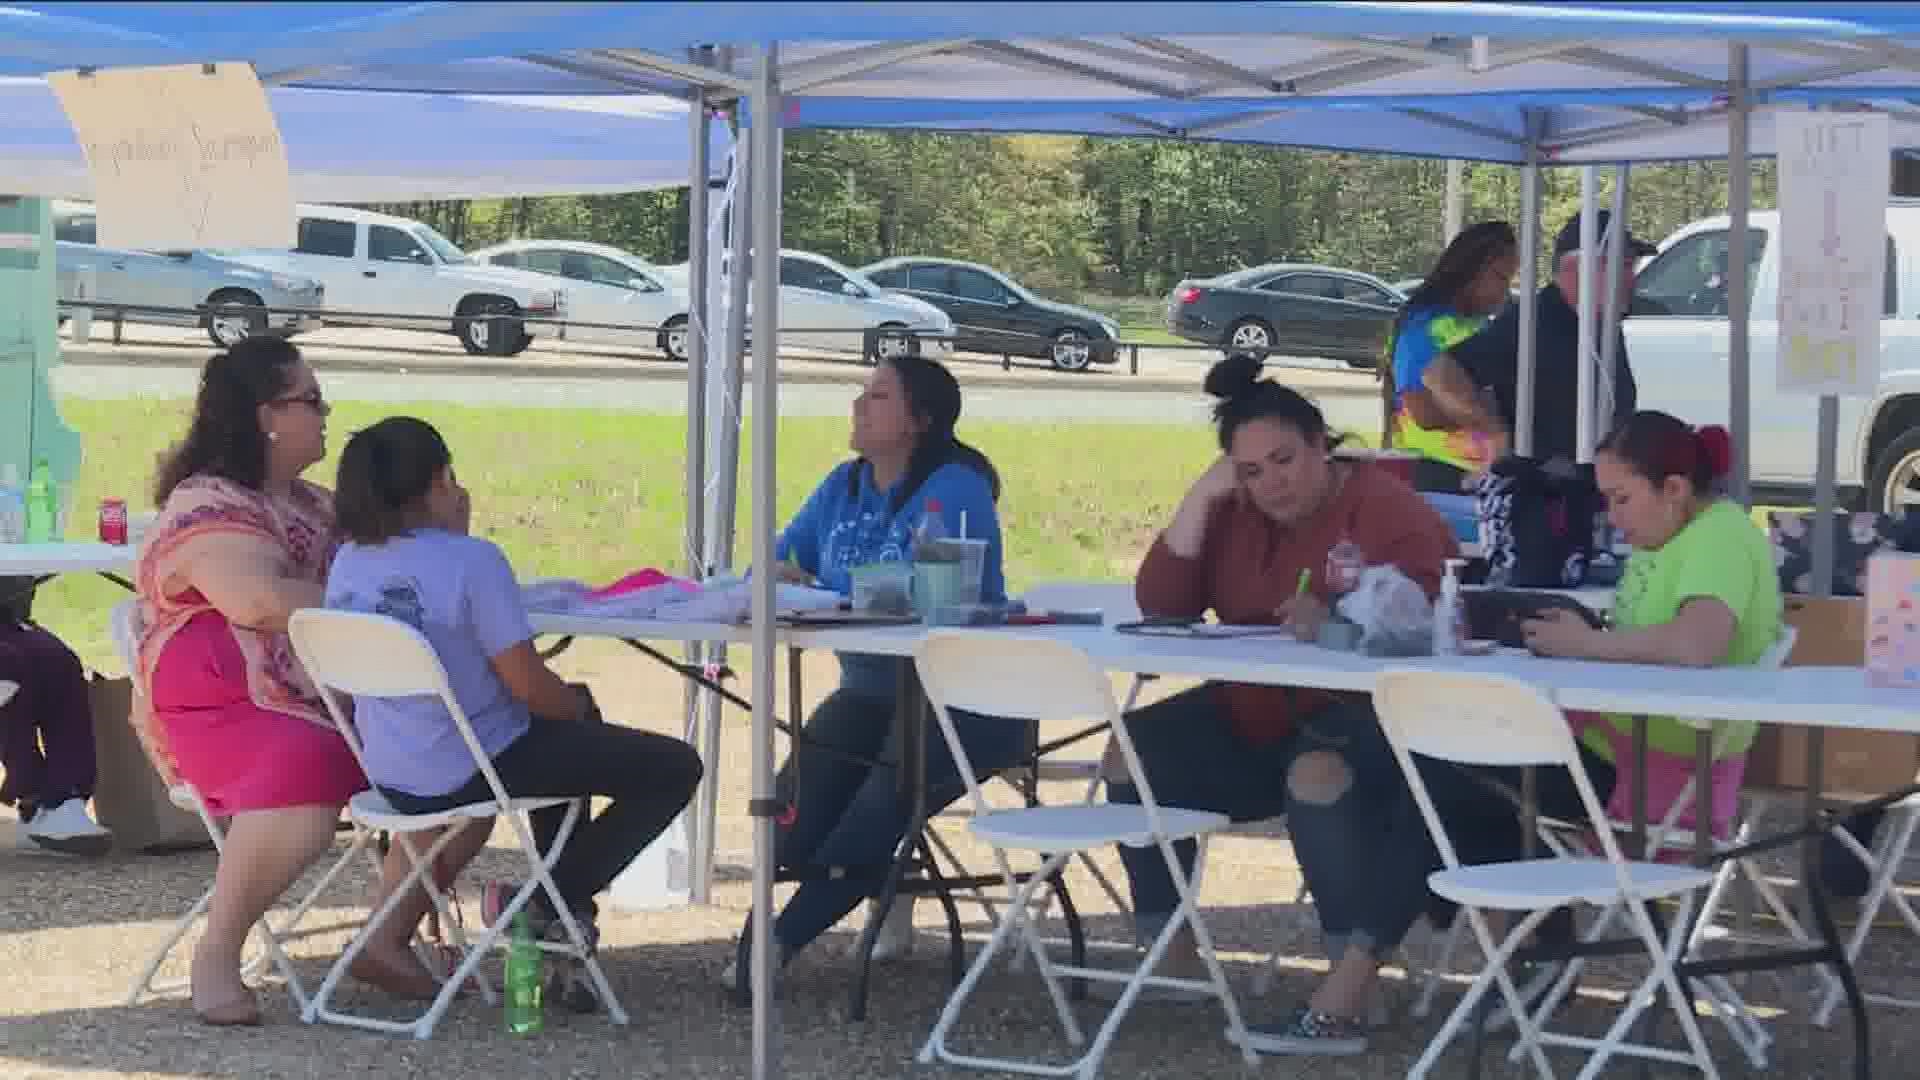 "The best thing for Congress to do would be for some solid immigration reform," said Karen Jones, East Texas Immigrant Advocacy and Resource Center.